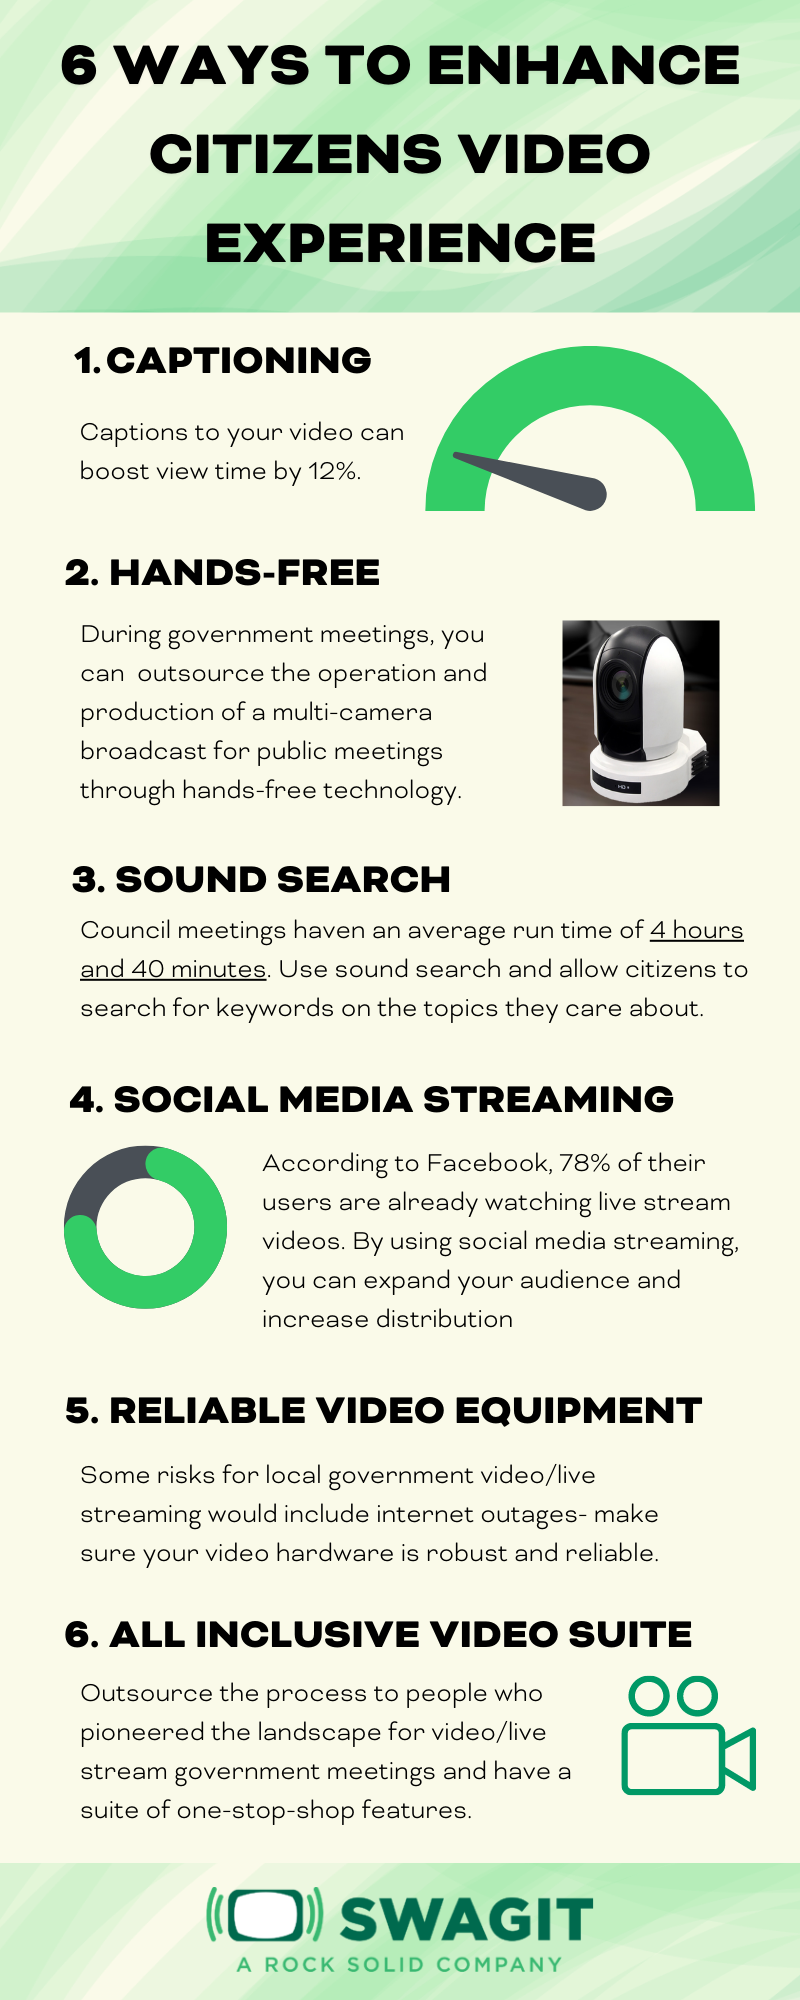 6 WAYS TO ENHANCE CITIZENS VIDEO EXPERIENCE